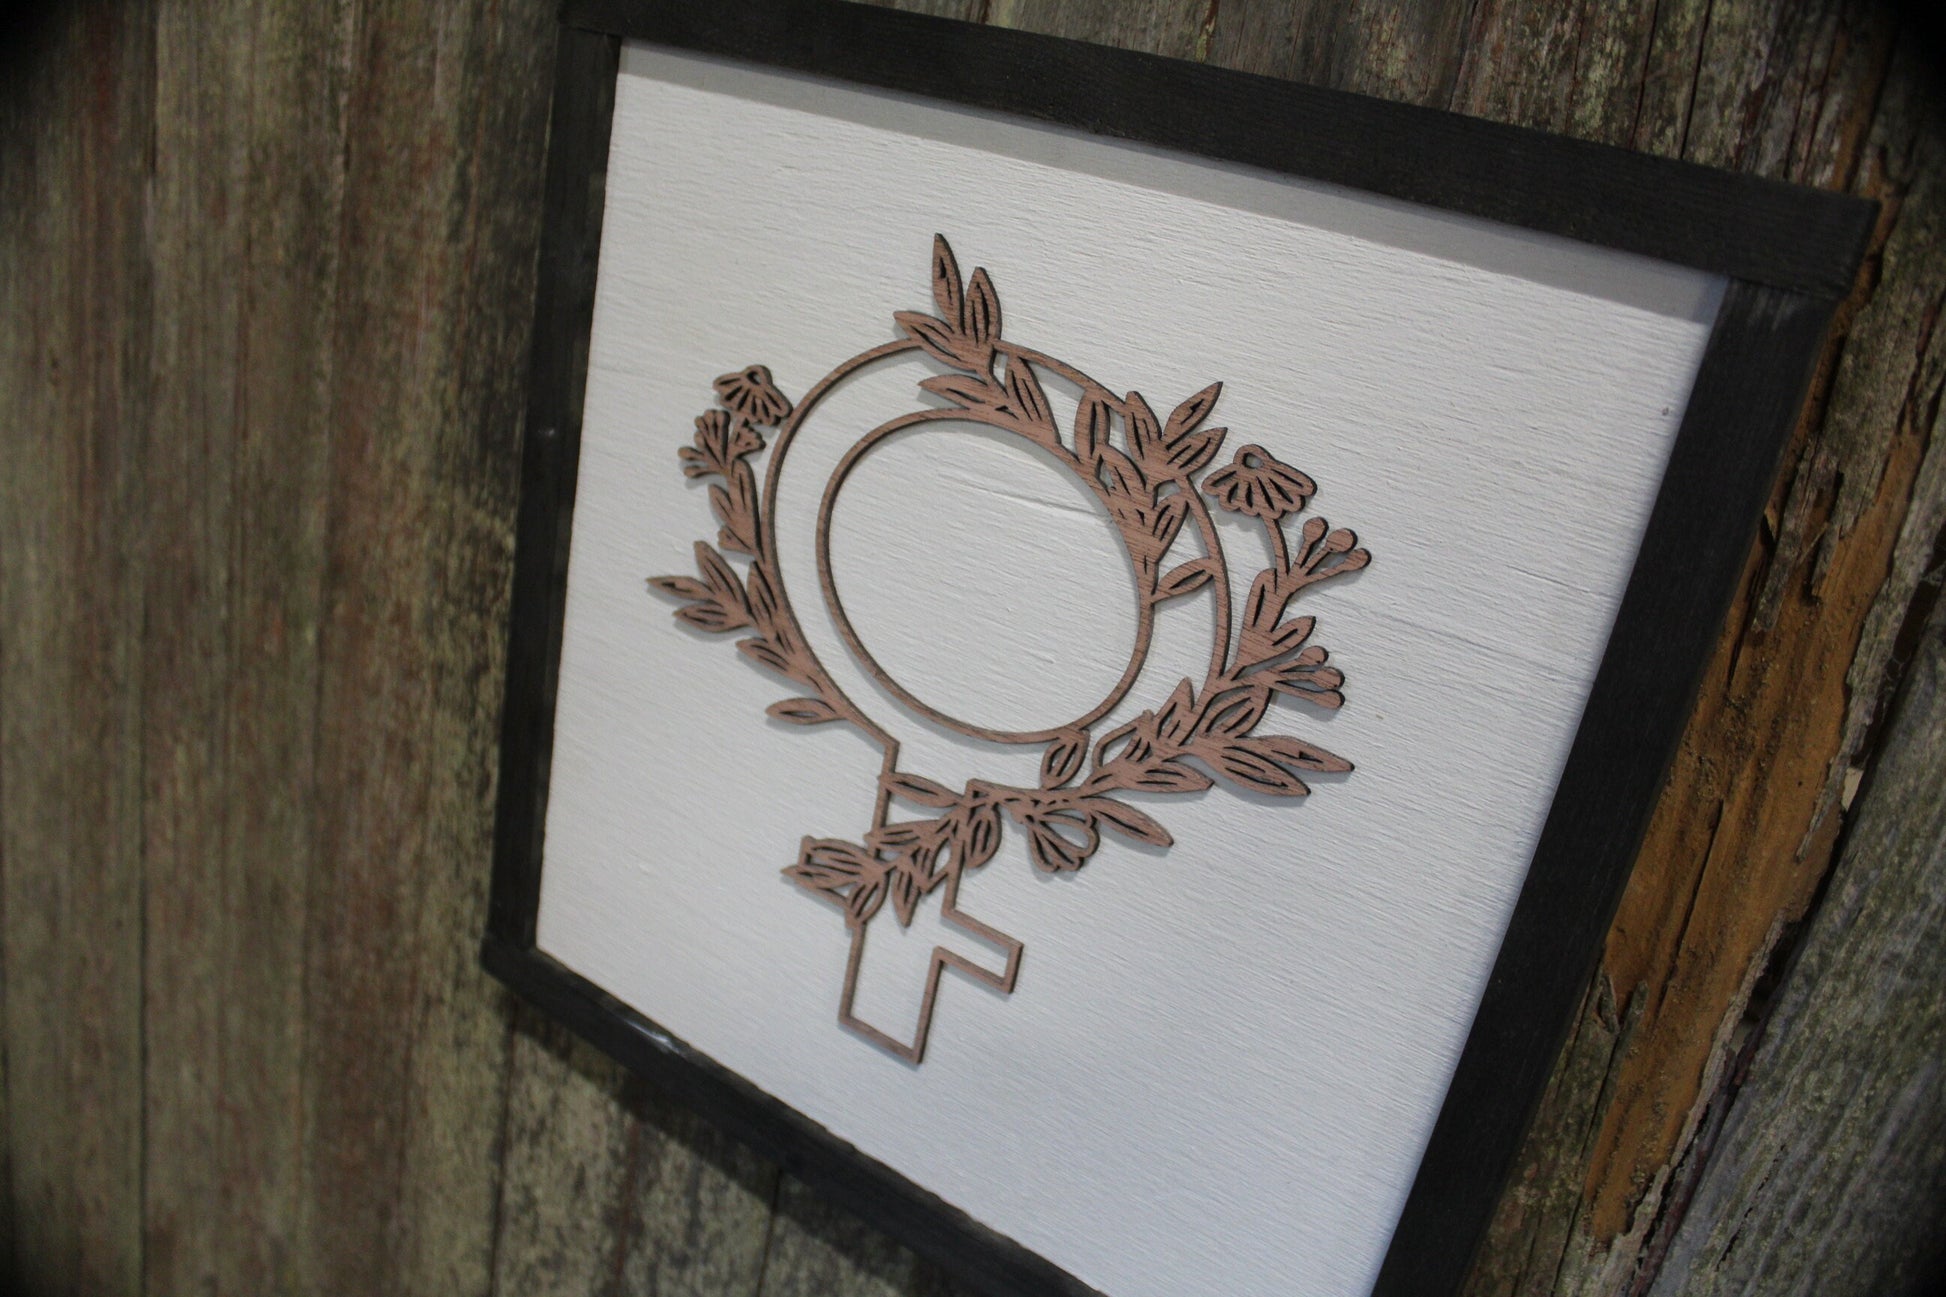 Women Sign Feminist Sign Lady Feminine Wood Sign 3D Raised Text Flowers Floral Graphic Image Organic Natural Salon Fashion Decor Rustic